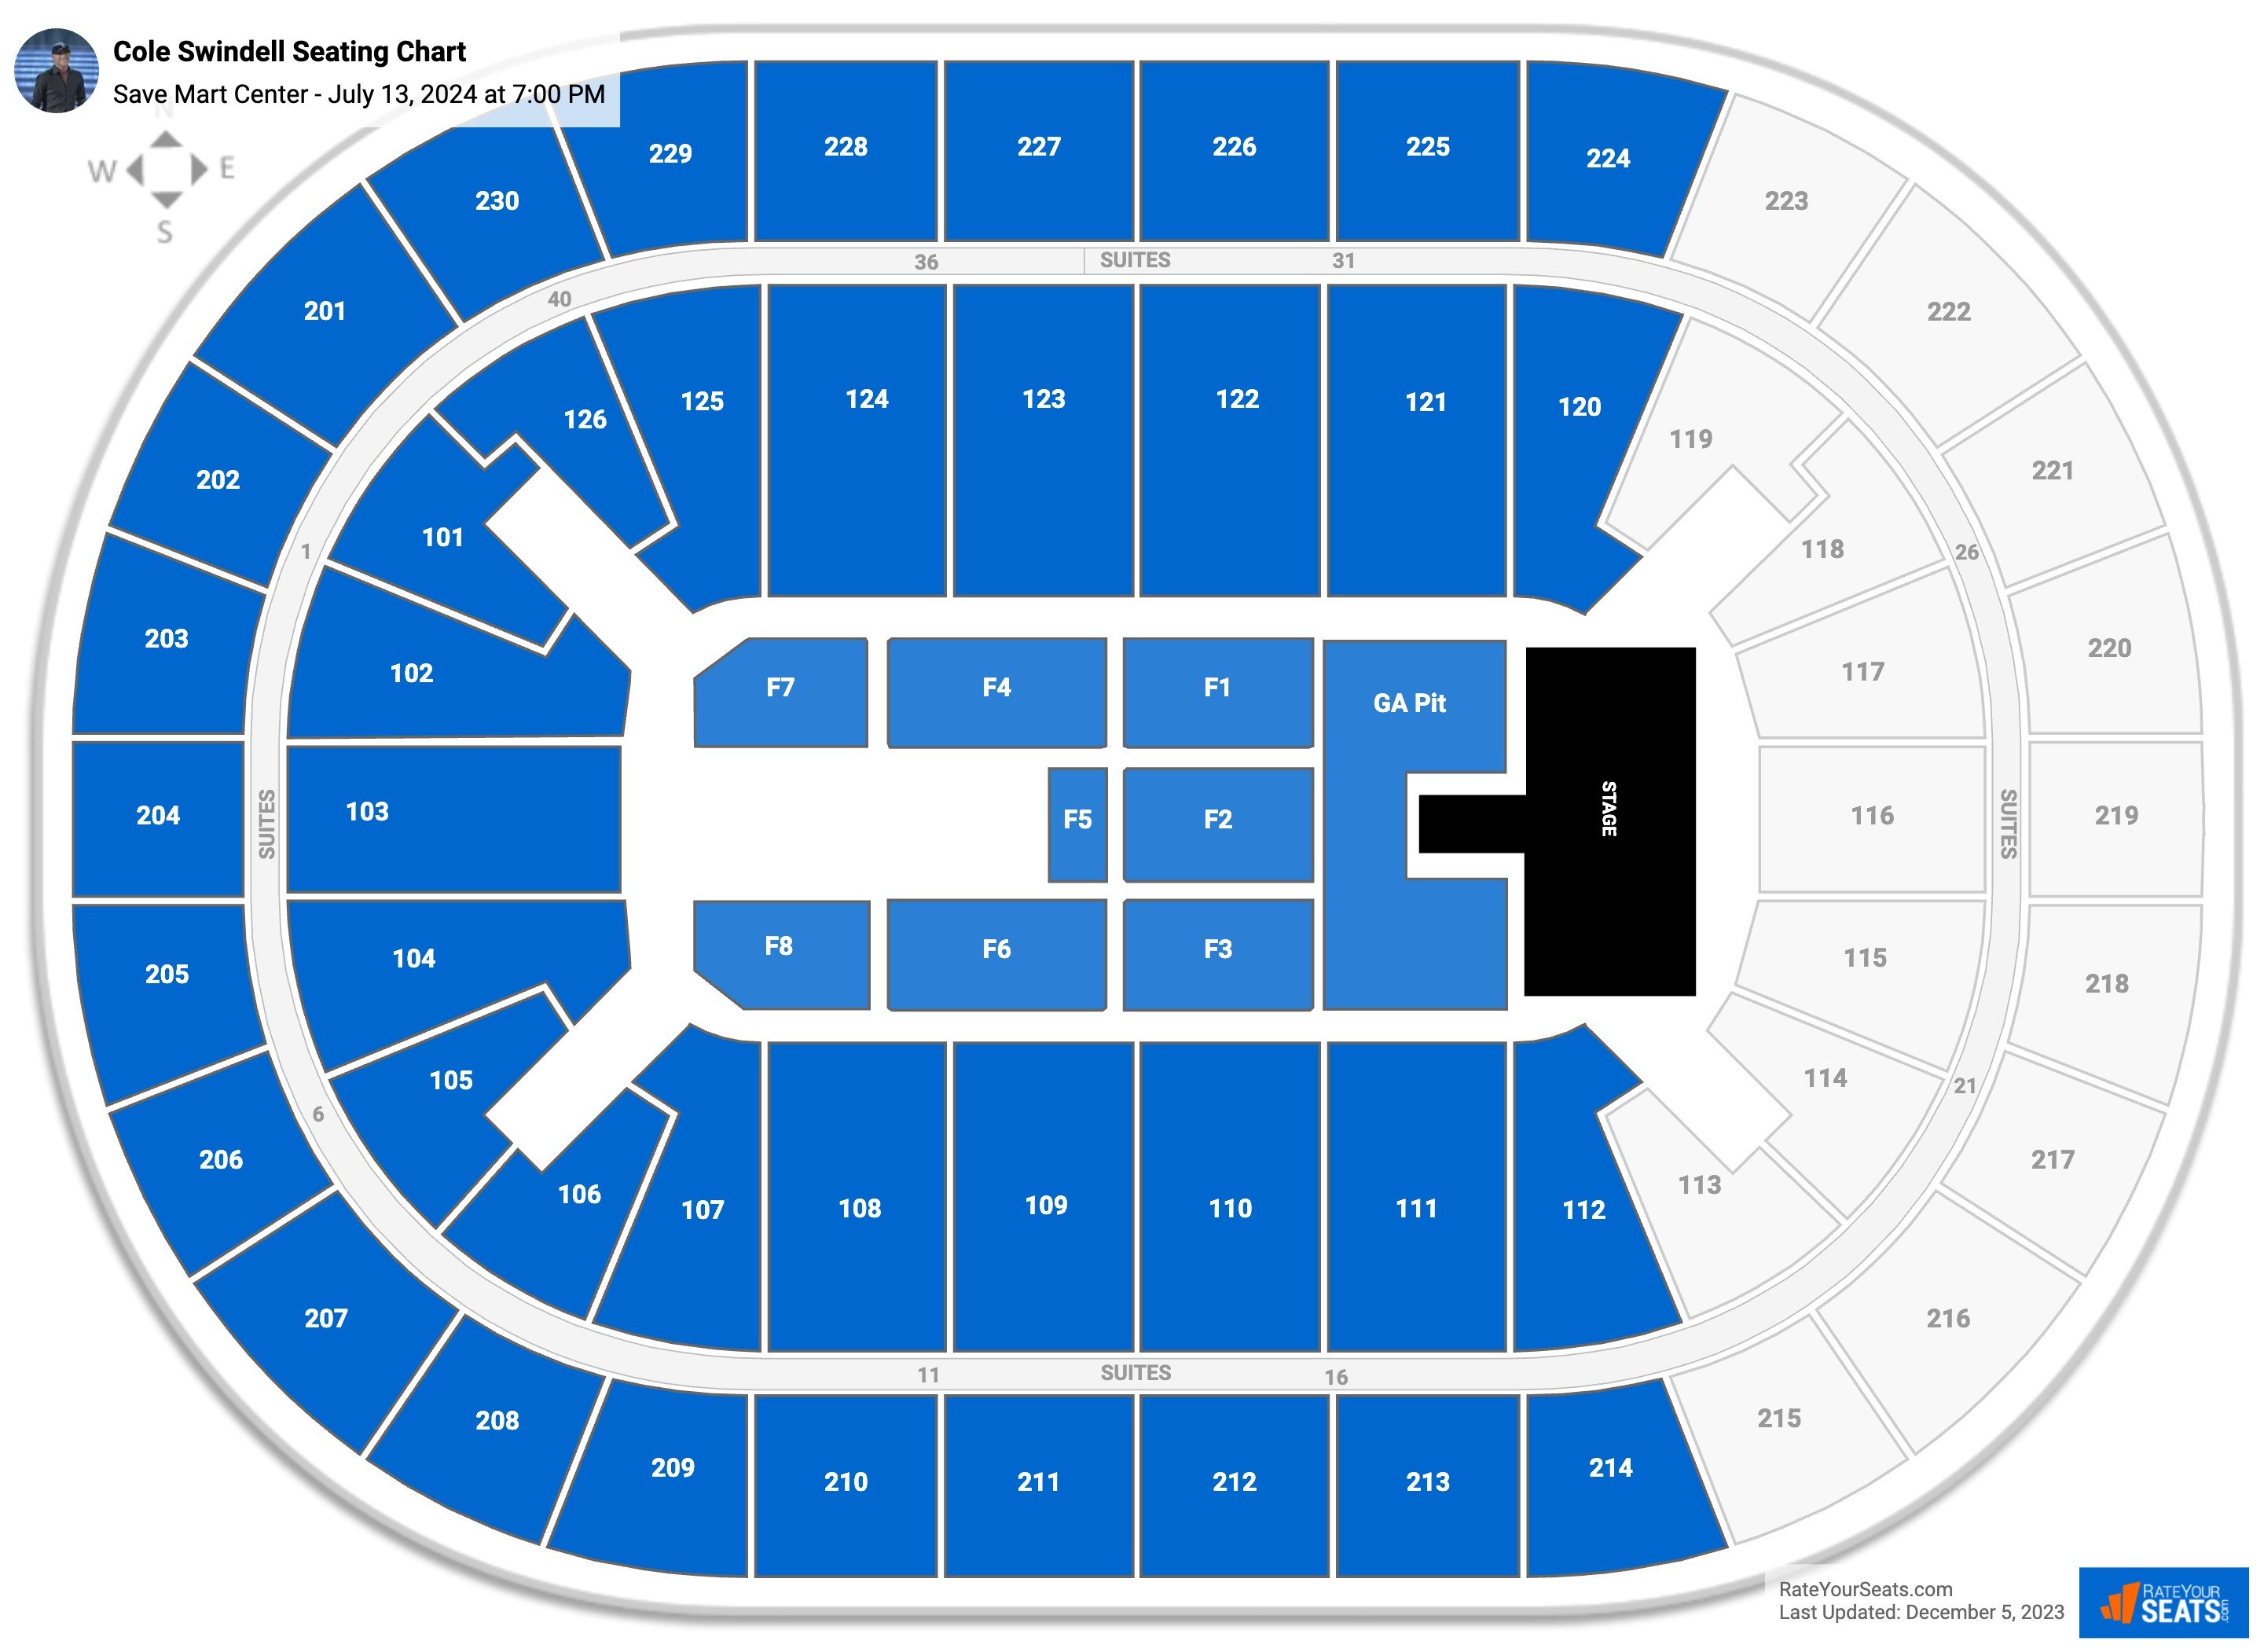 Cole Swindell seating chart Save Mart Center